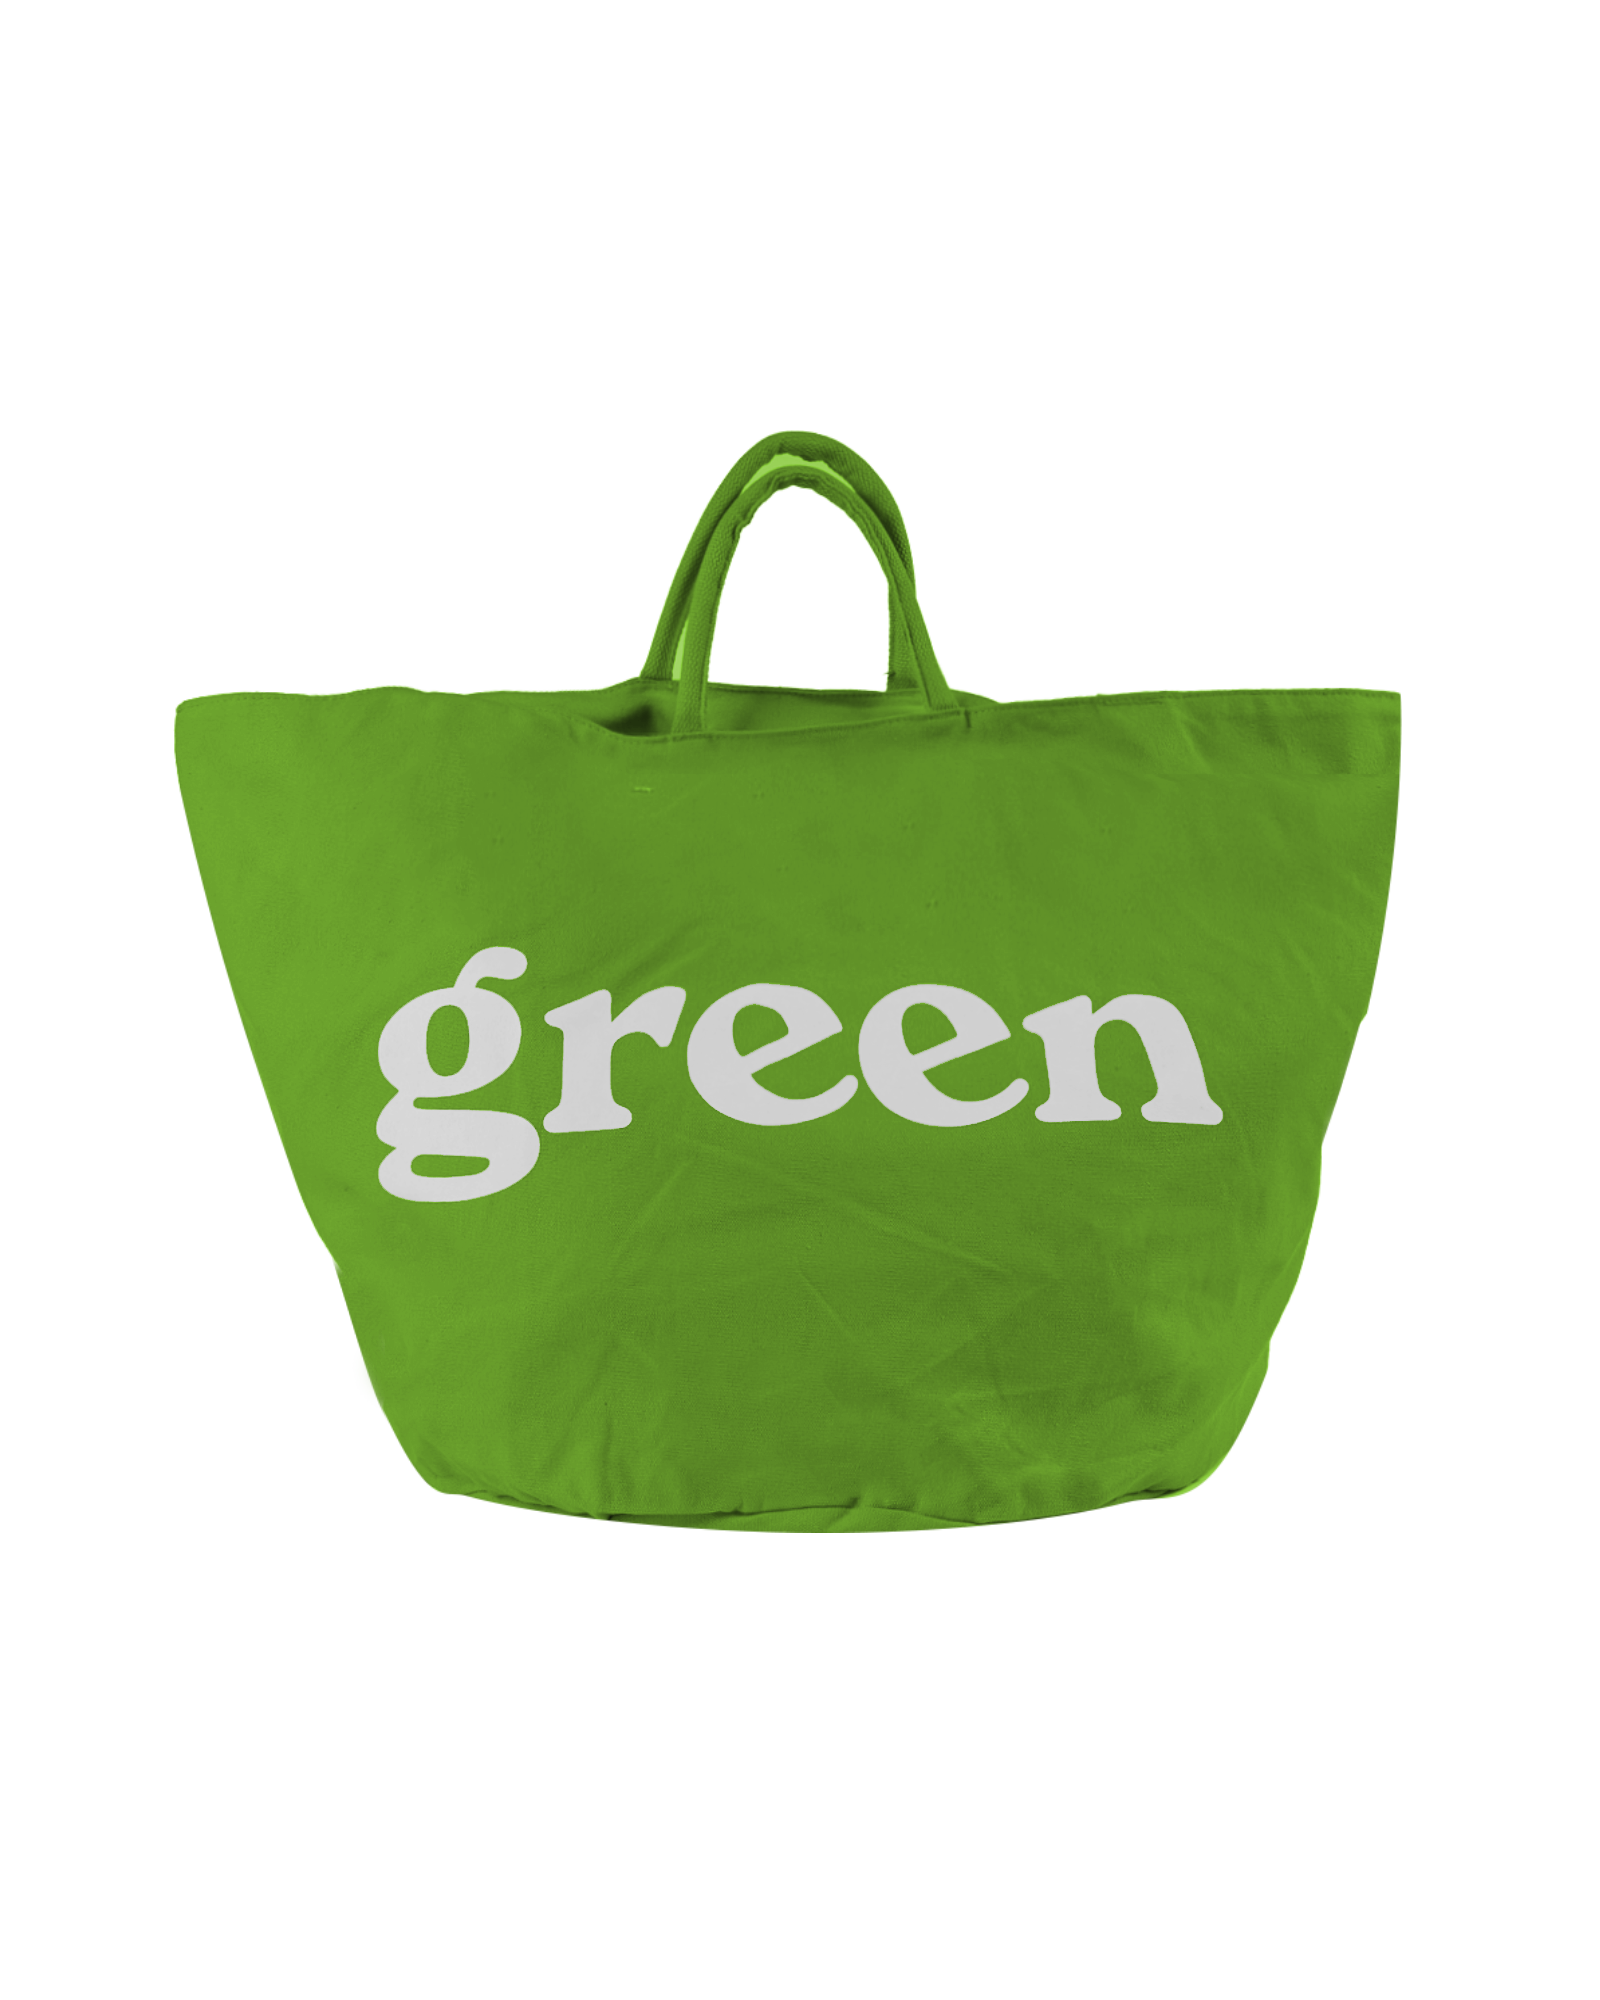 Mister Green - Accessory - Large Grow Bag/Tote - V2 - Green